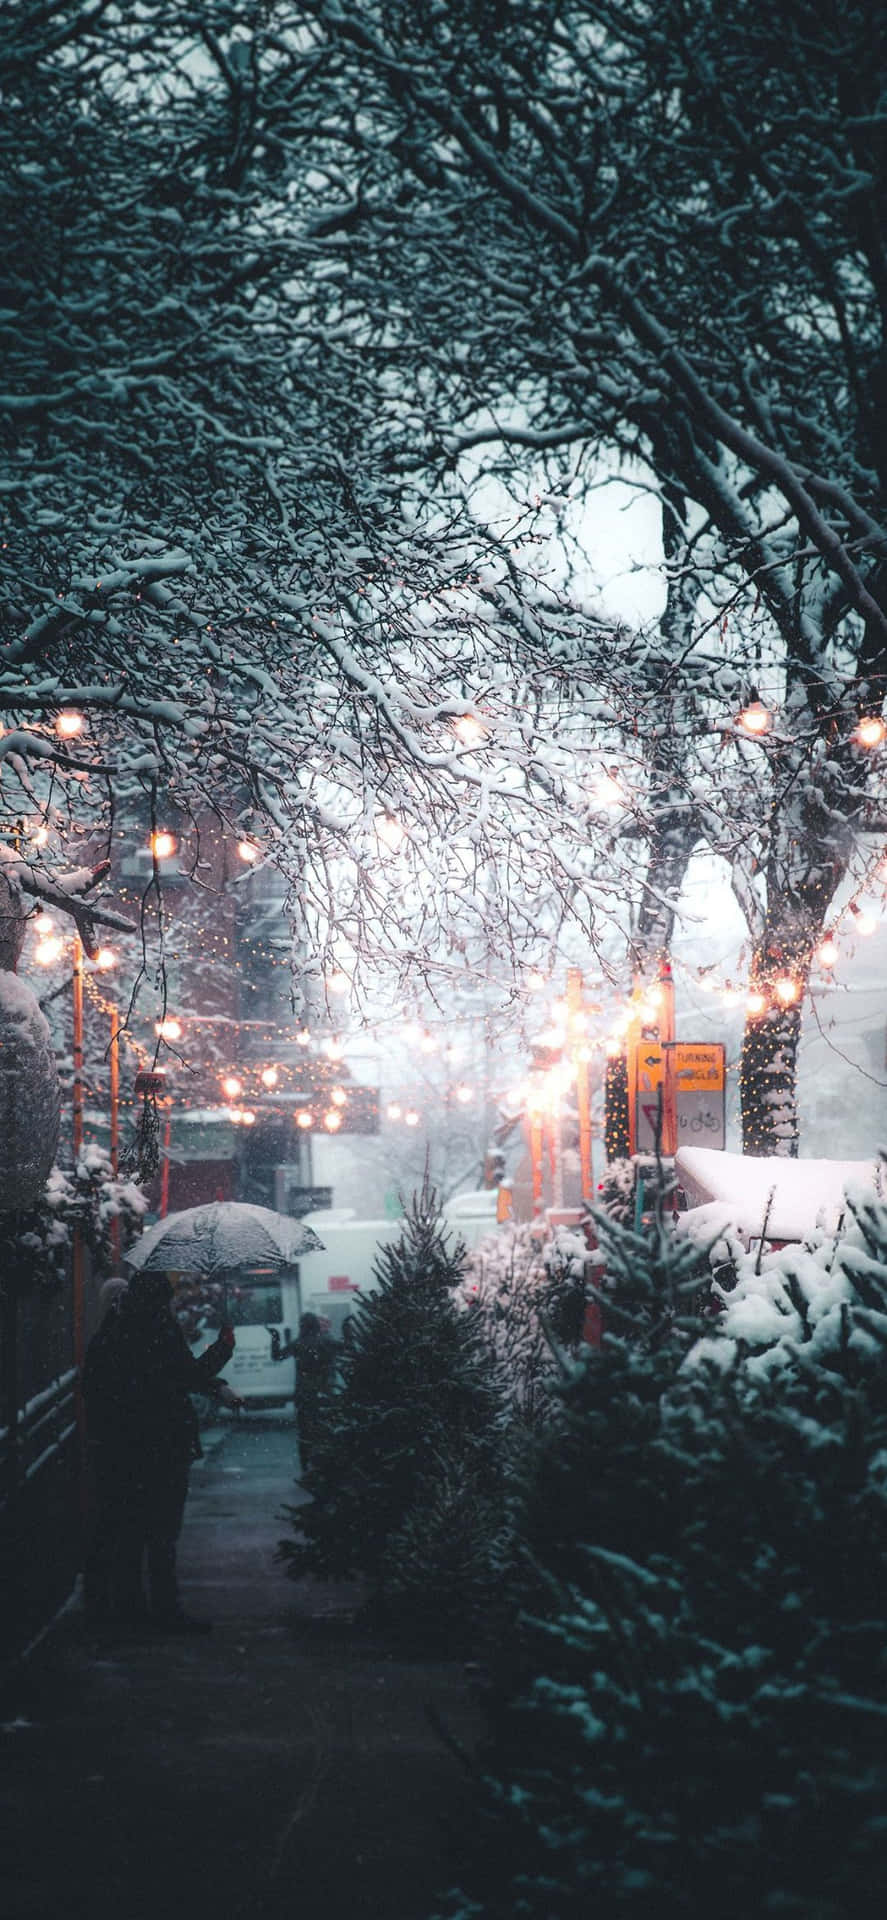 Embrace the cool winter season with snow aesthetics.